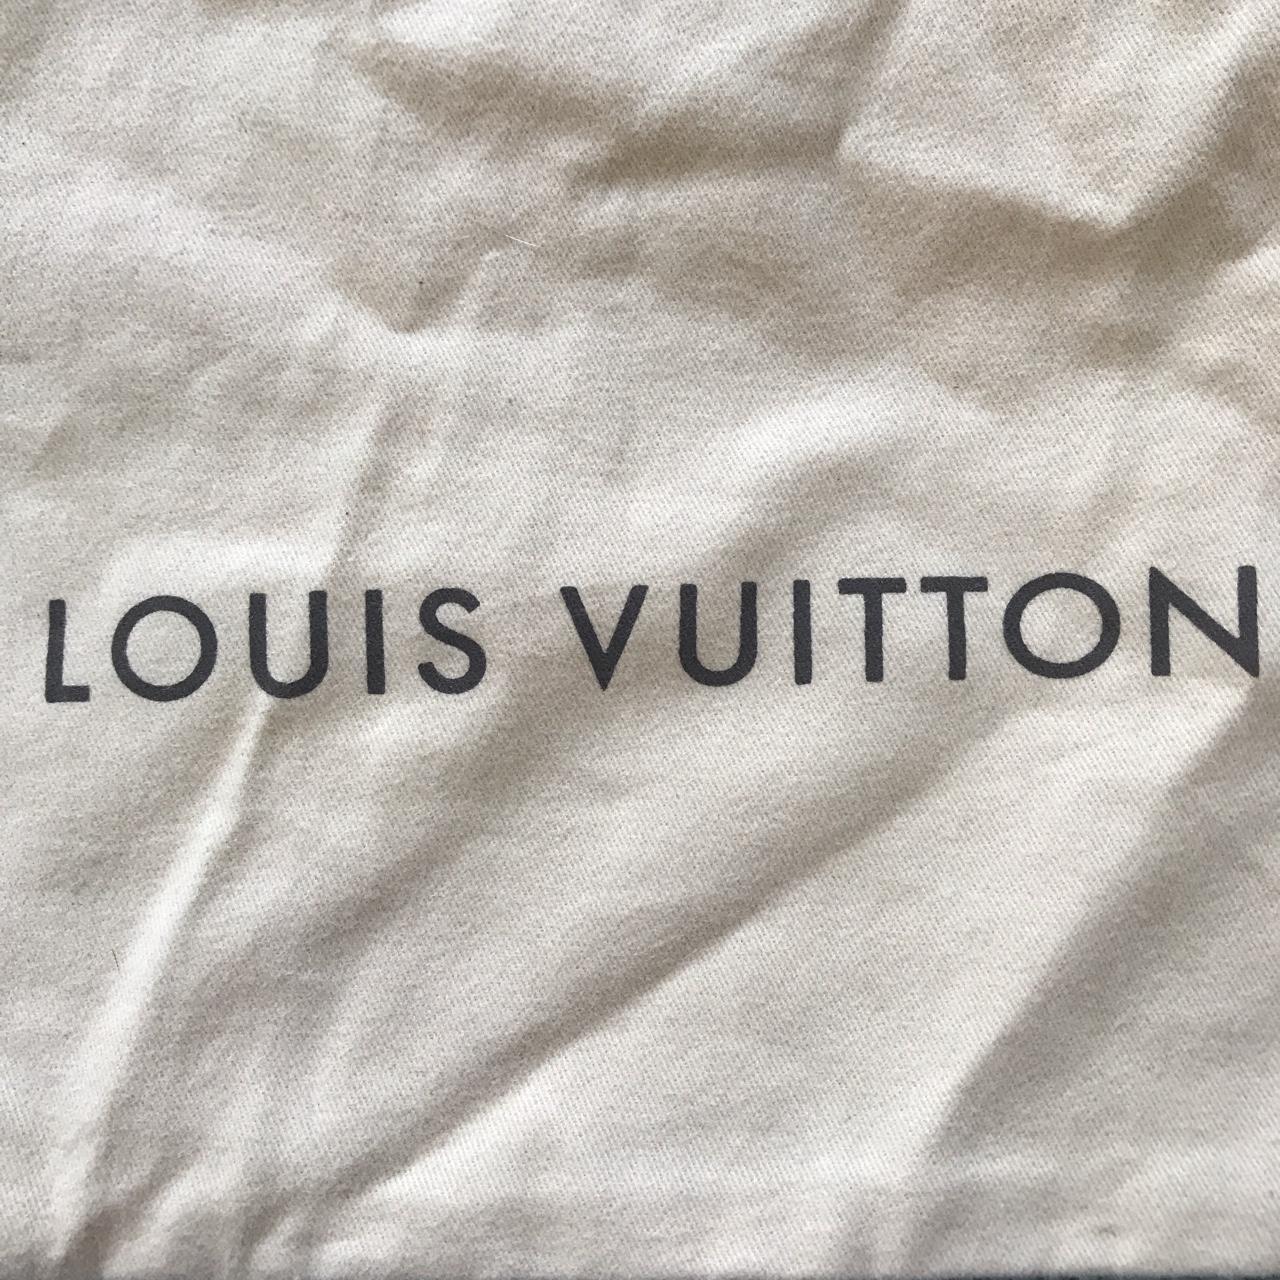 Authentic Louis Vuitton dust bag 9 inches Wide x 15 inches